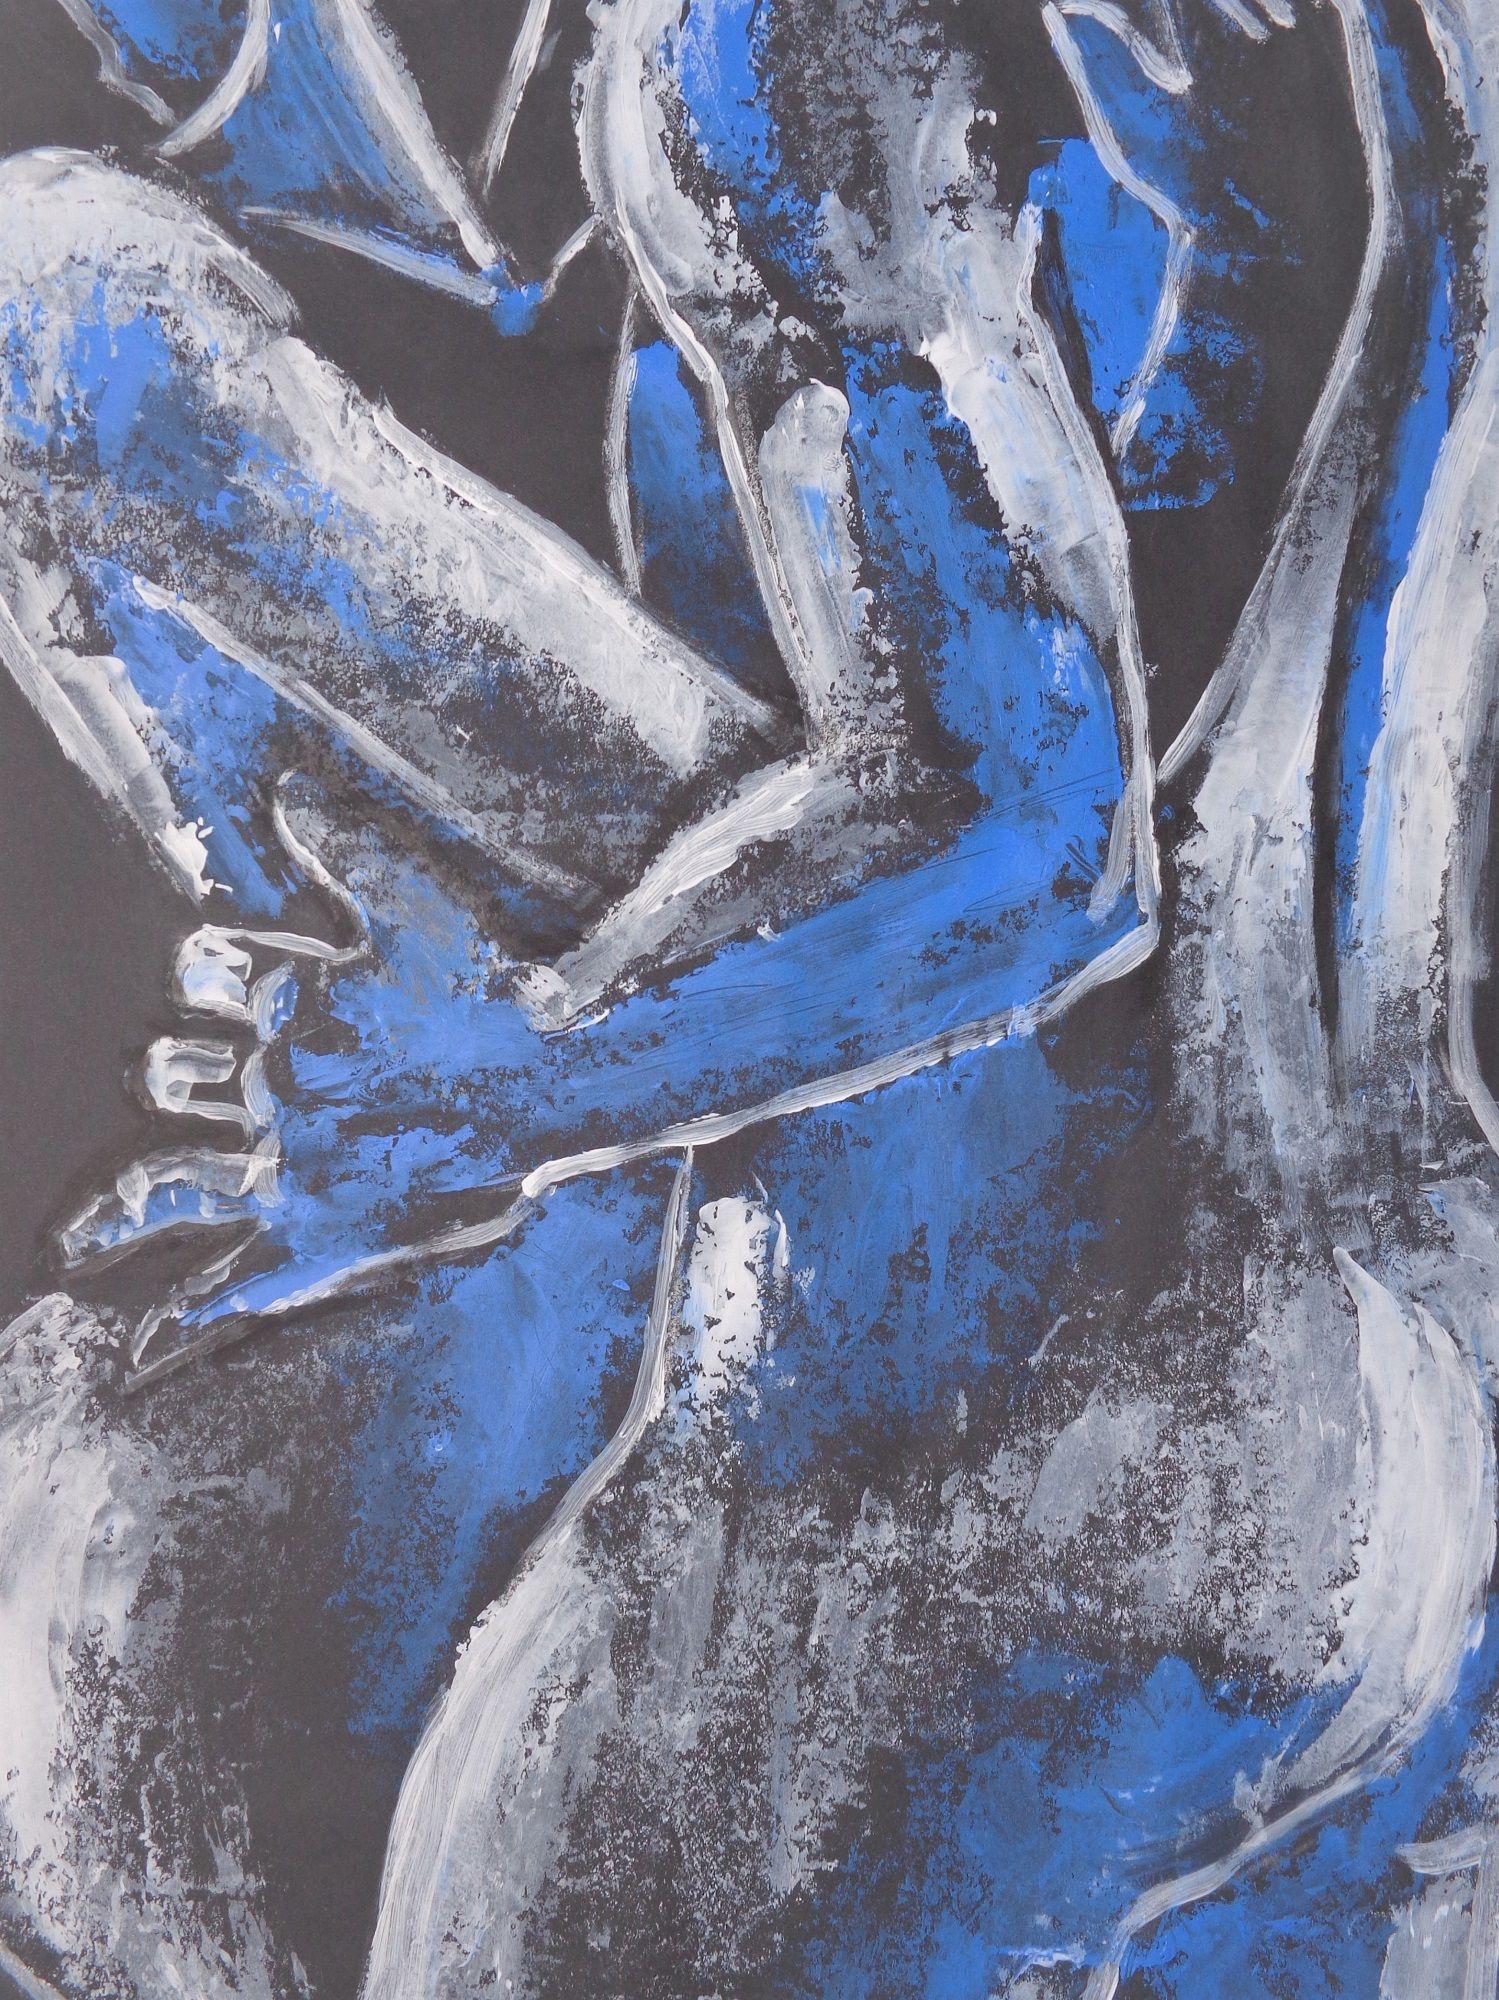 Original contemporary figurative painting, unframed. White and blue acrylics on black paper, part of a new series of erotic and sensual drawings and paintings of passionate lovers. Size 59 cm x 84 cm (23.5